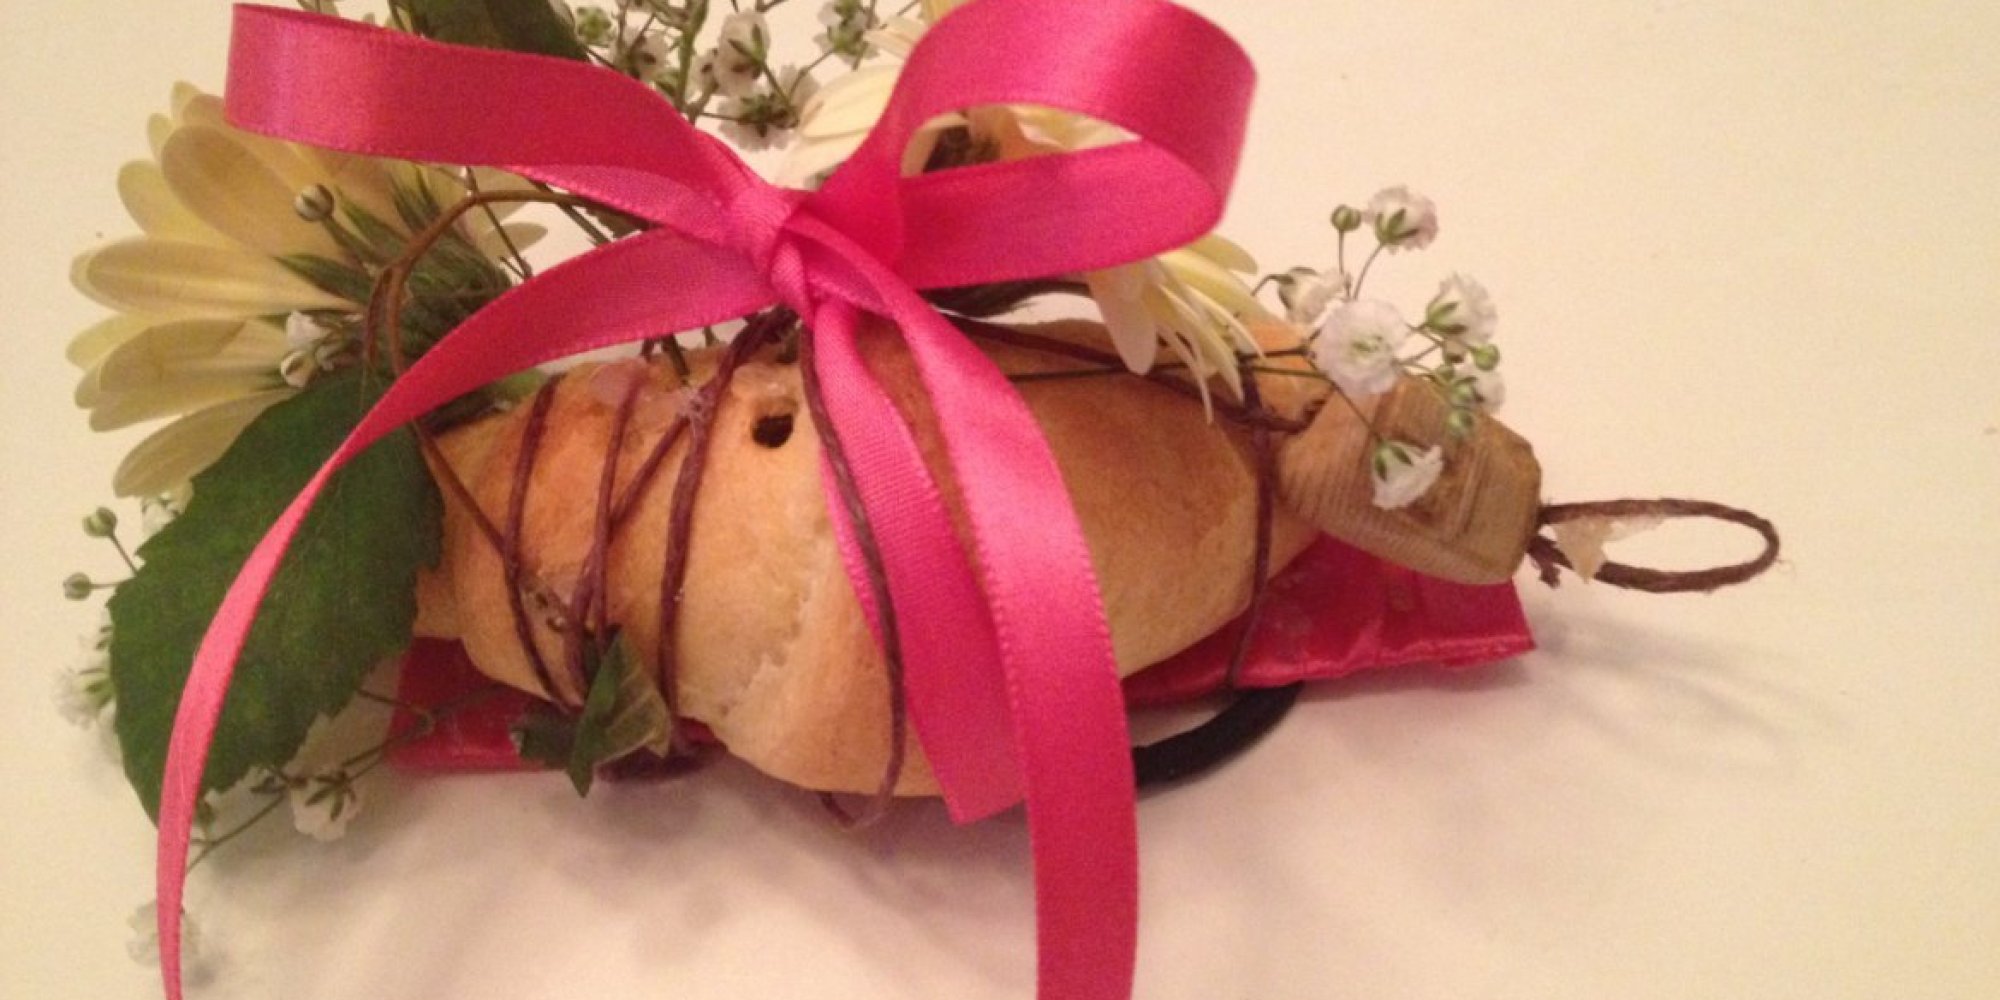 Twitter trolls boy for croissant corsage mishap for prom Daily Mail